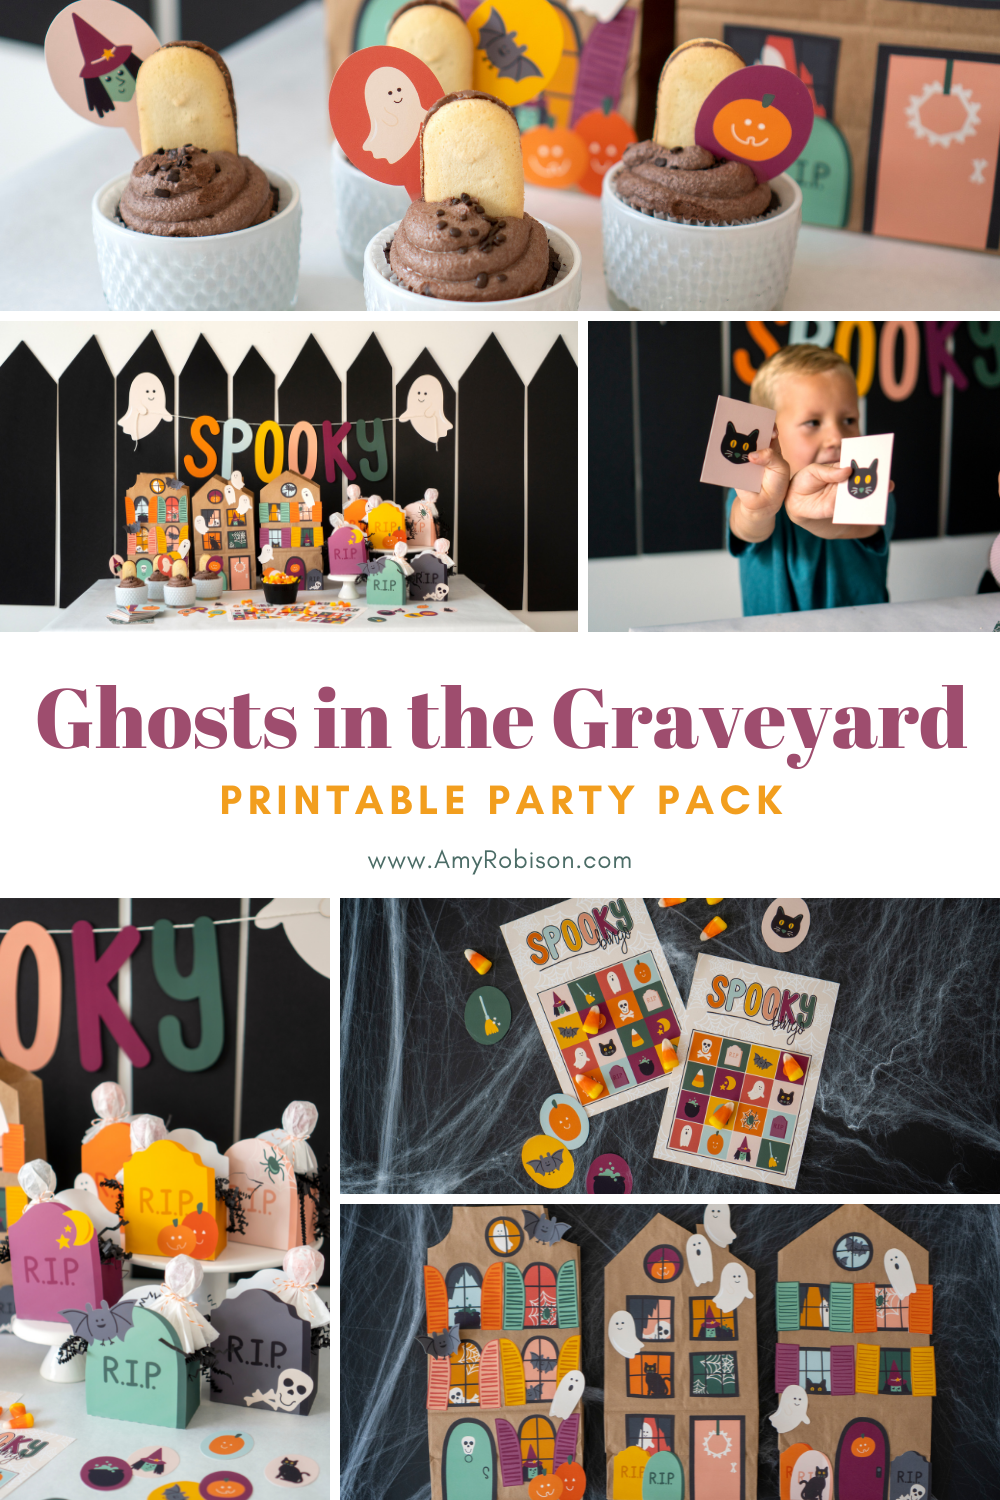 The Ghosts in the Graveyard Halloween Party Pack is full of fun Halloween activities to do all month long with your family or to use as party decorations. 